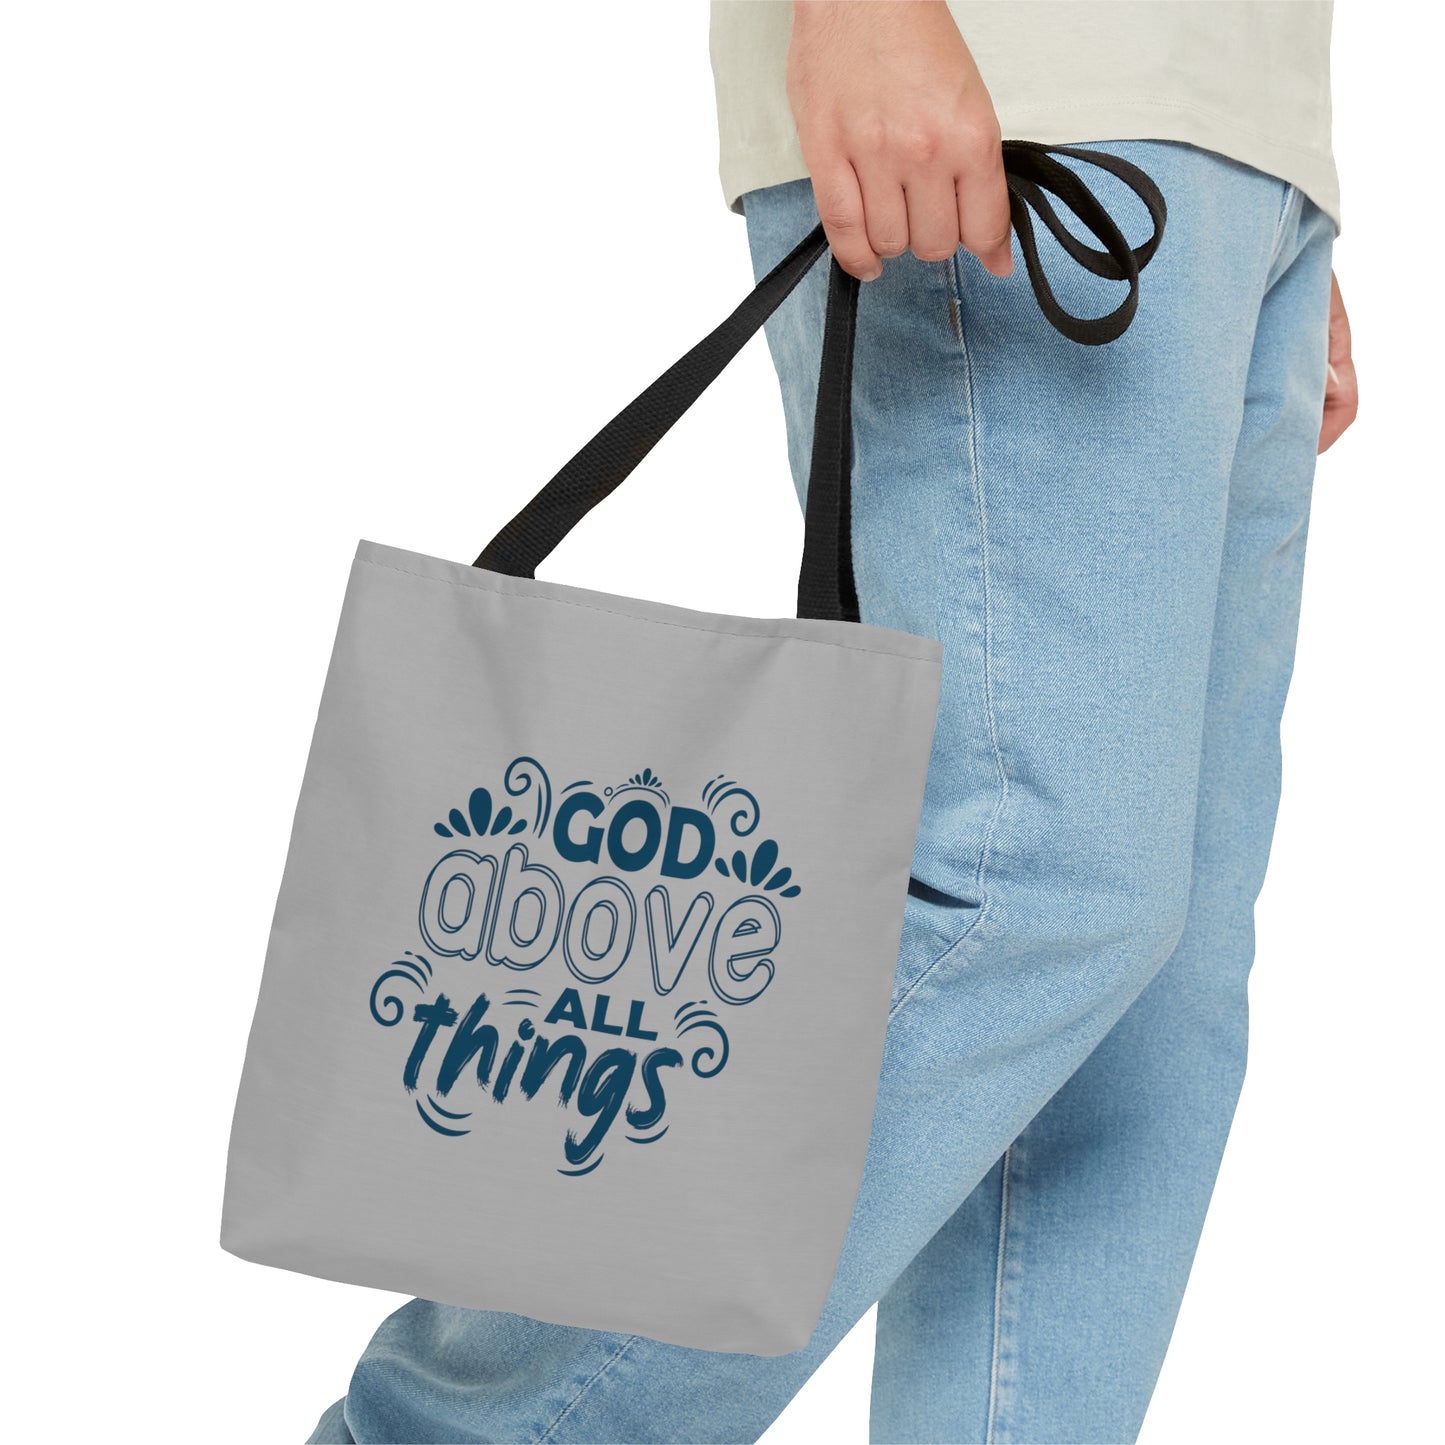 God Above All Things Tote Bag